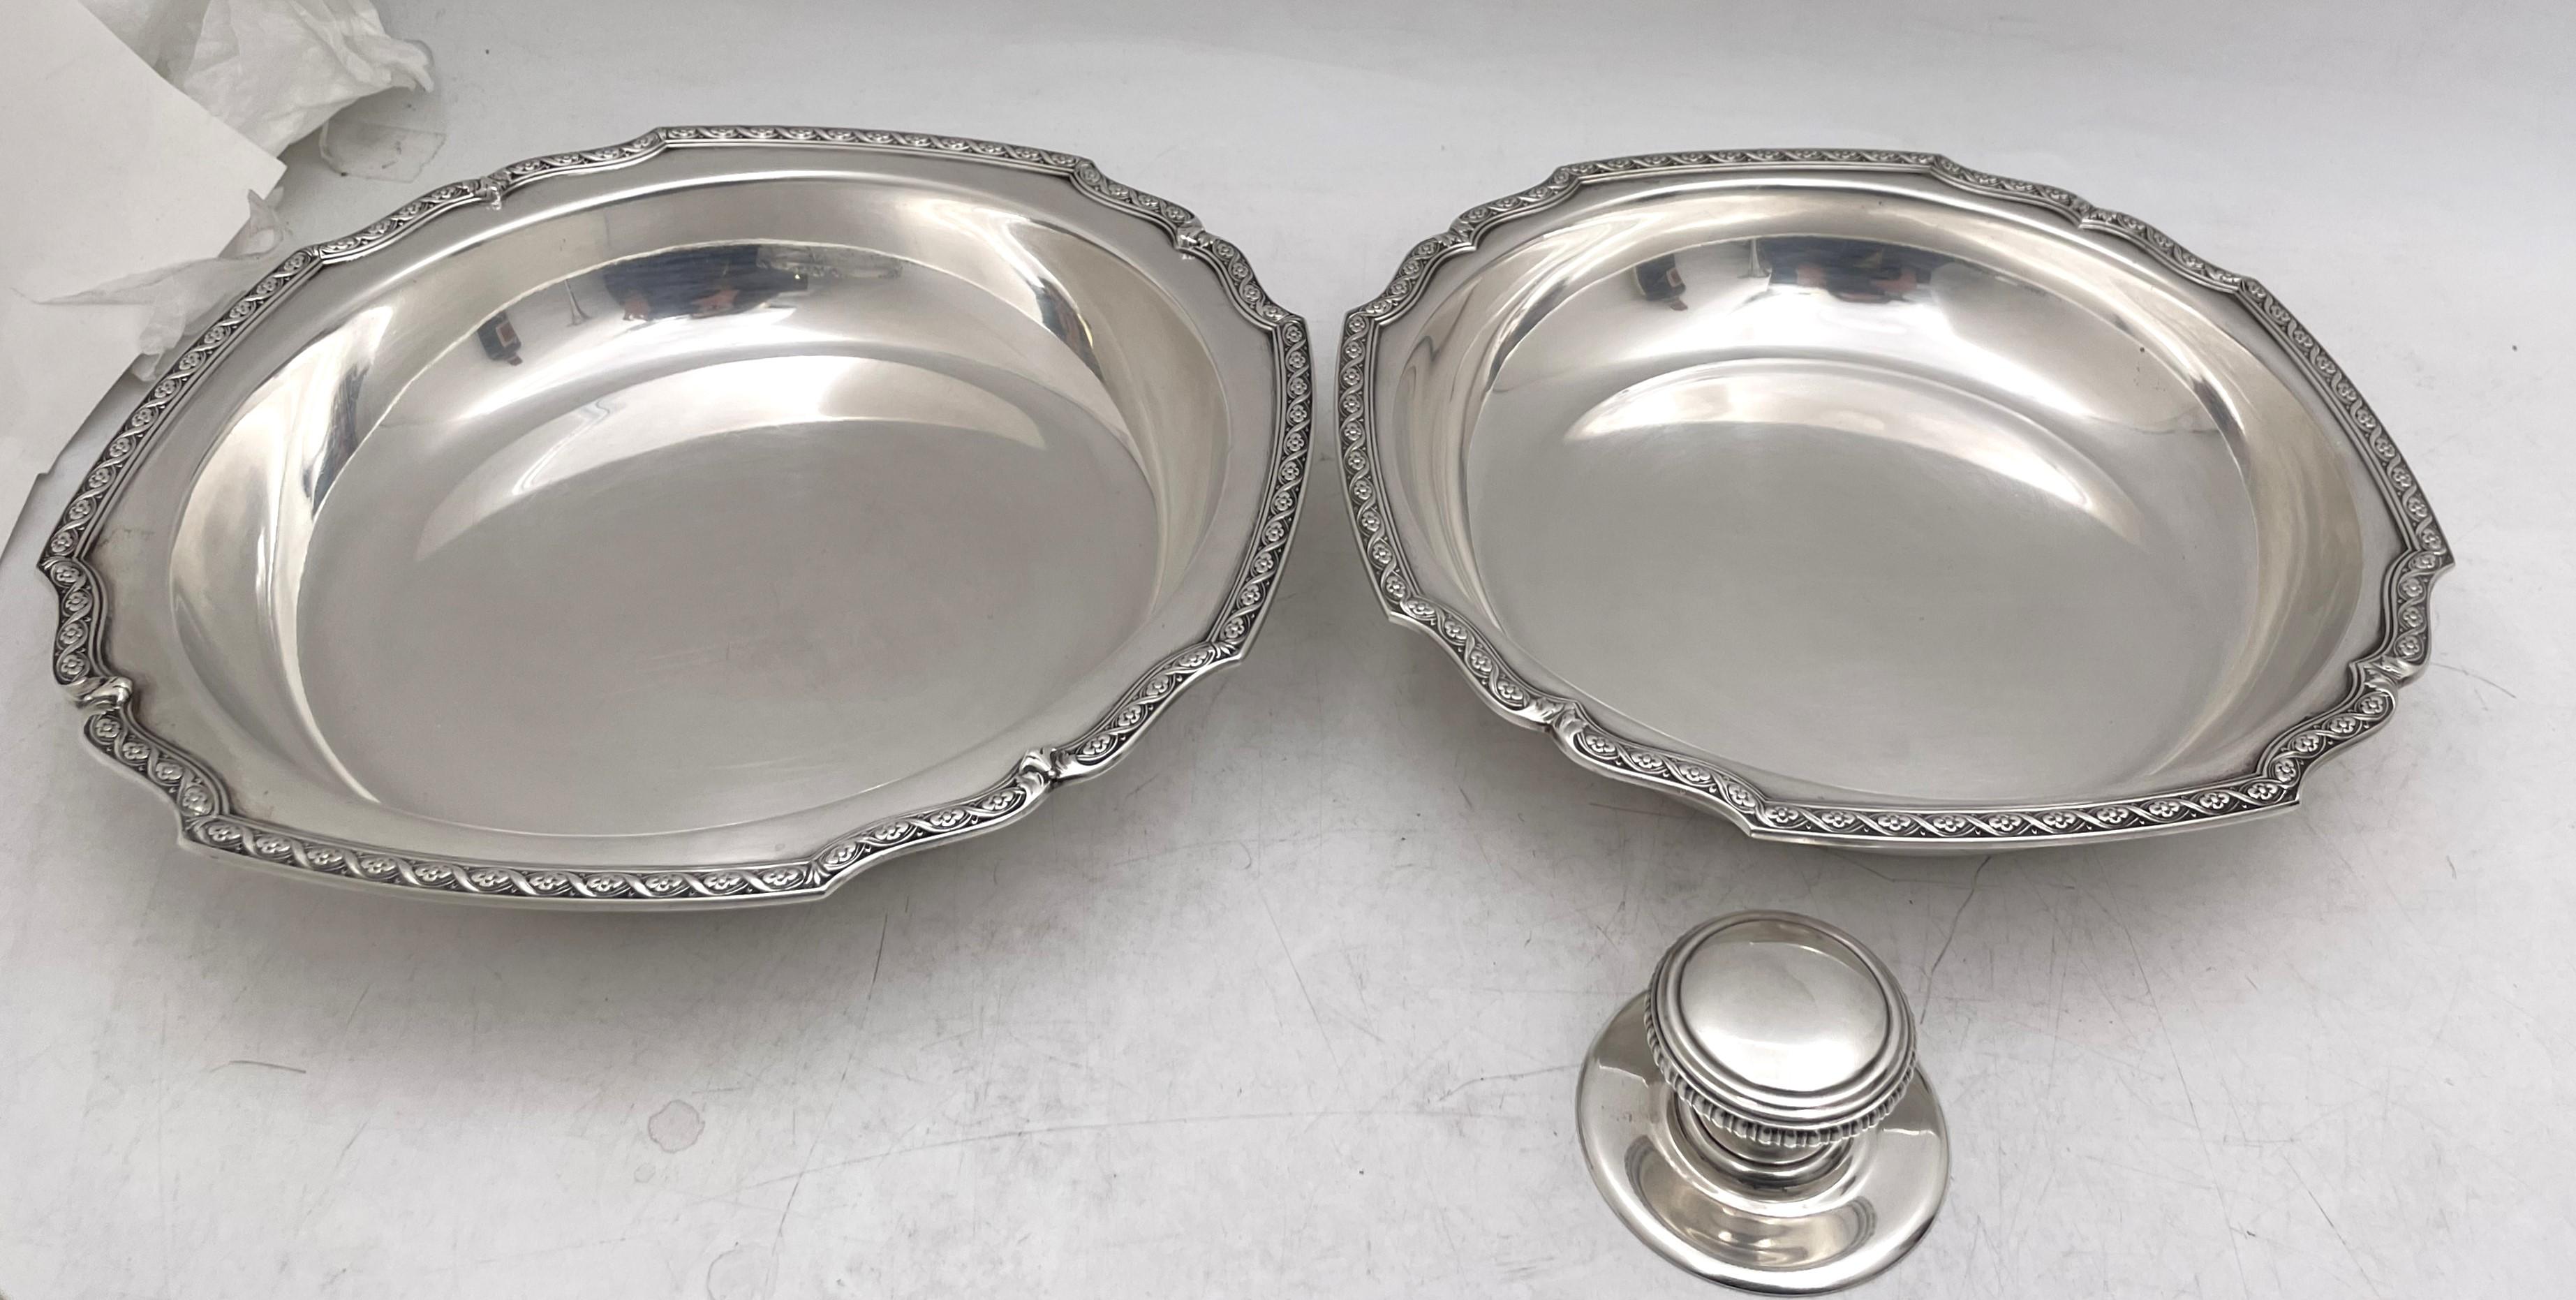 Tiffany & Co. Sterling Silver 1926 Covered Vegetable Dish Pair of Bowls Art Deco For Sale 2